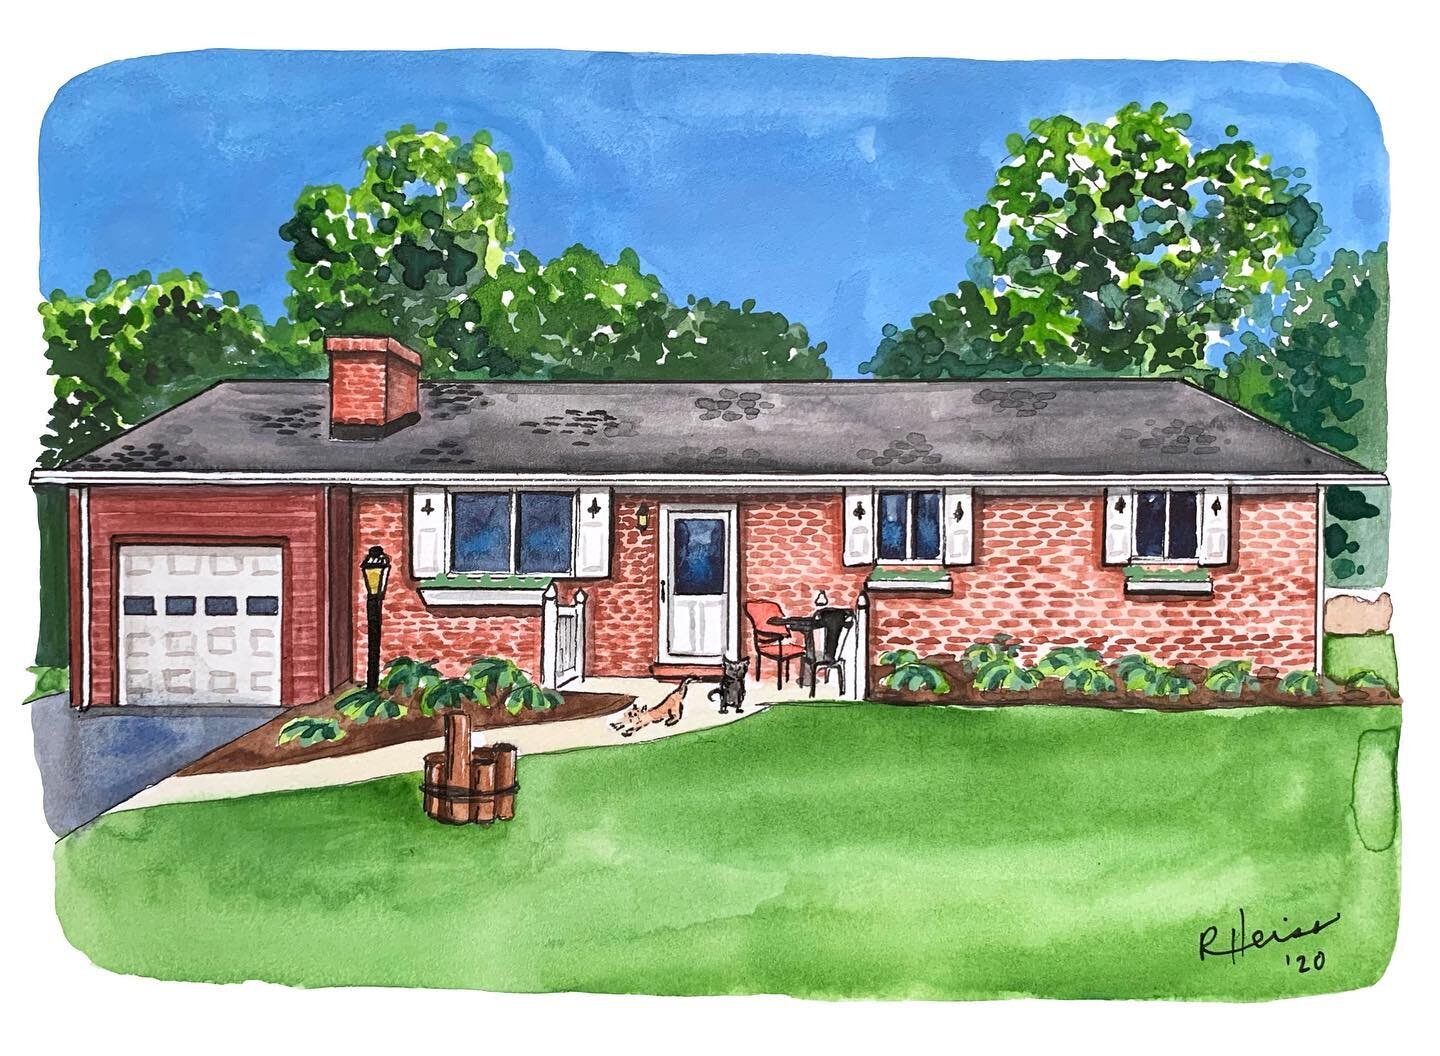 Another holiday house portrait! 5x7, watercolor and gouache on Bristol board. Favorite parts: the brick, the keyhole details in the shutters, and the two cats at the front entryway!